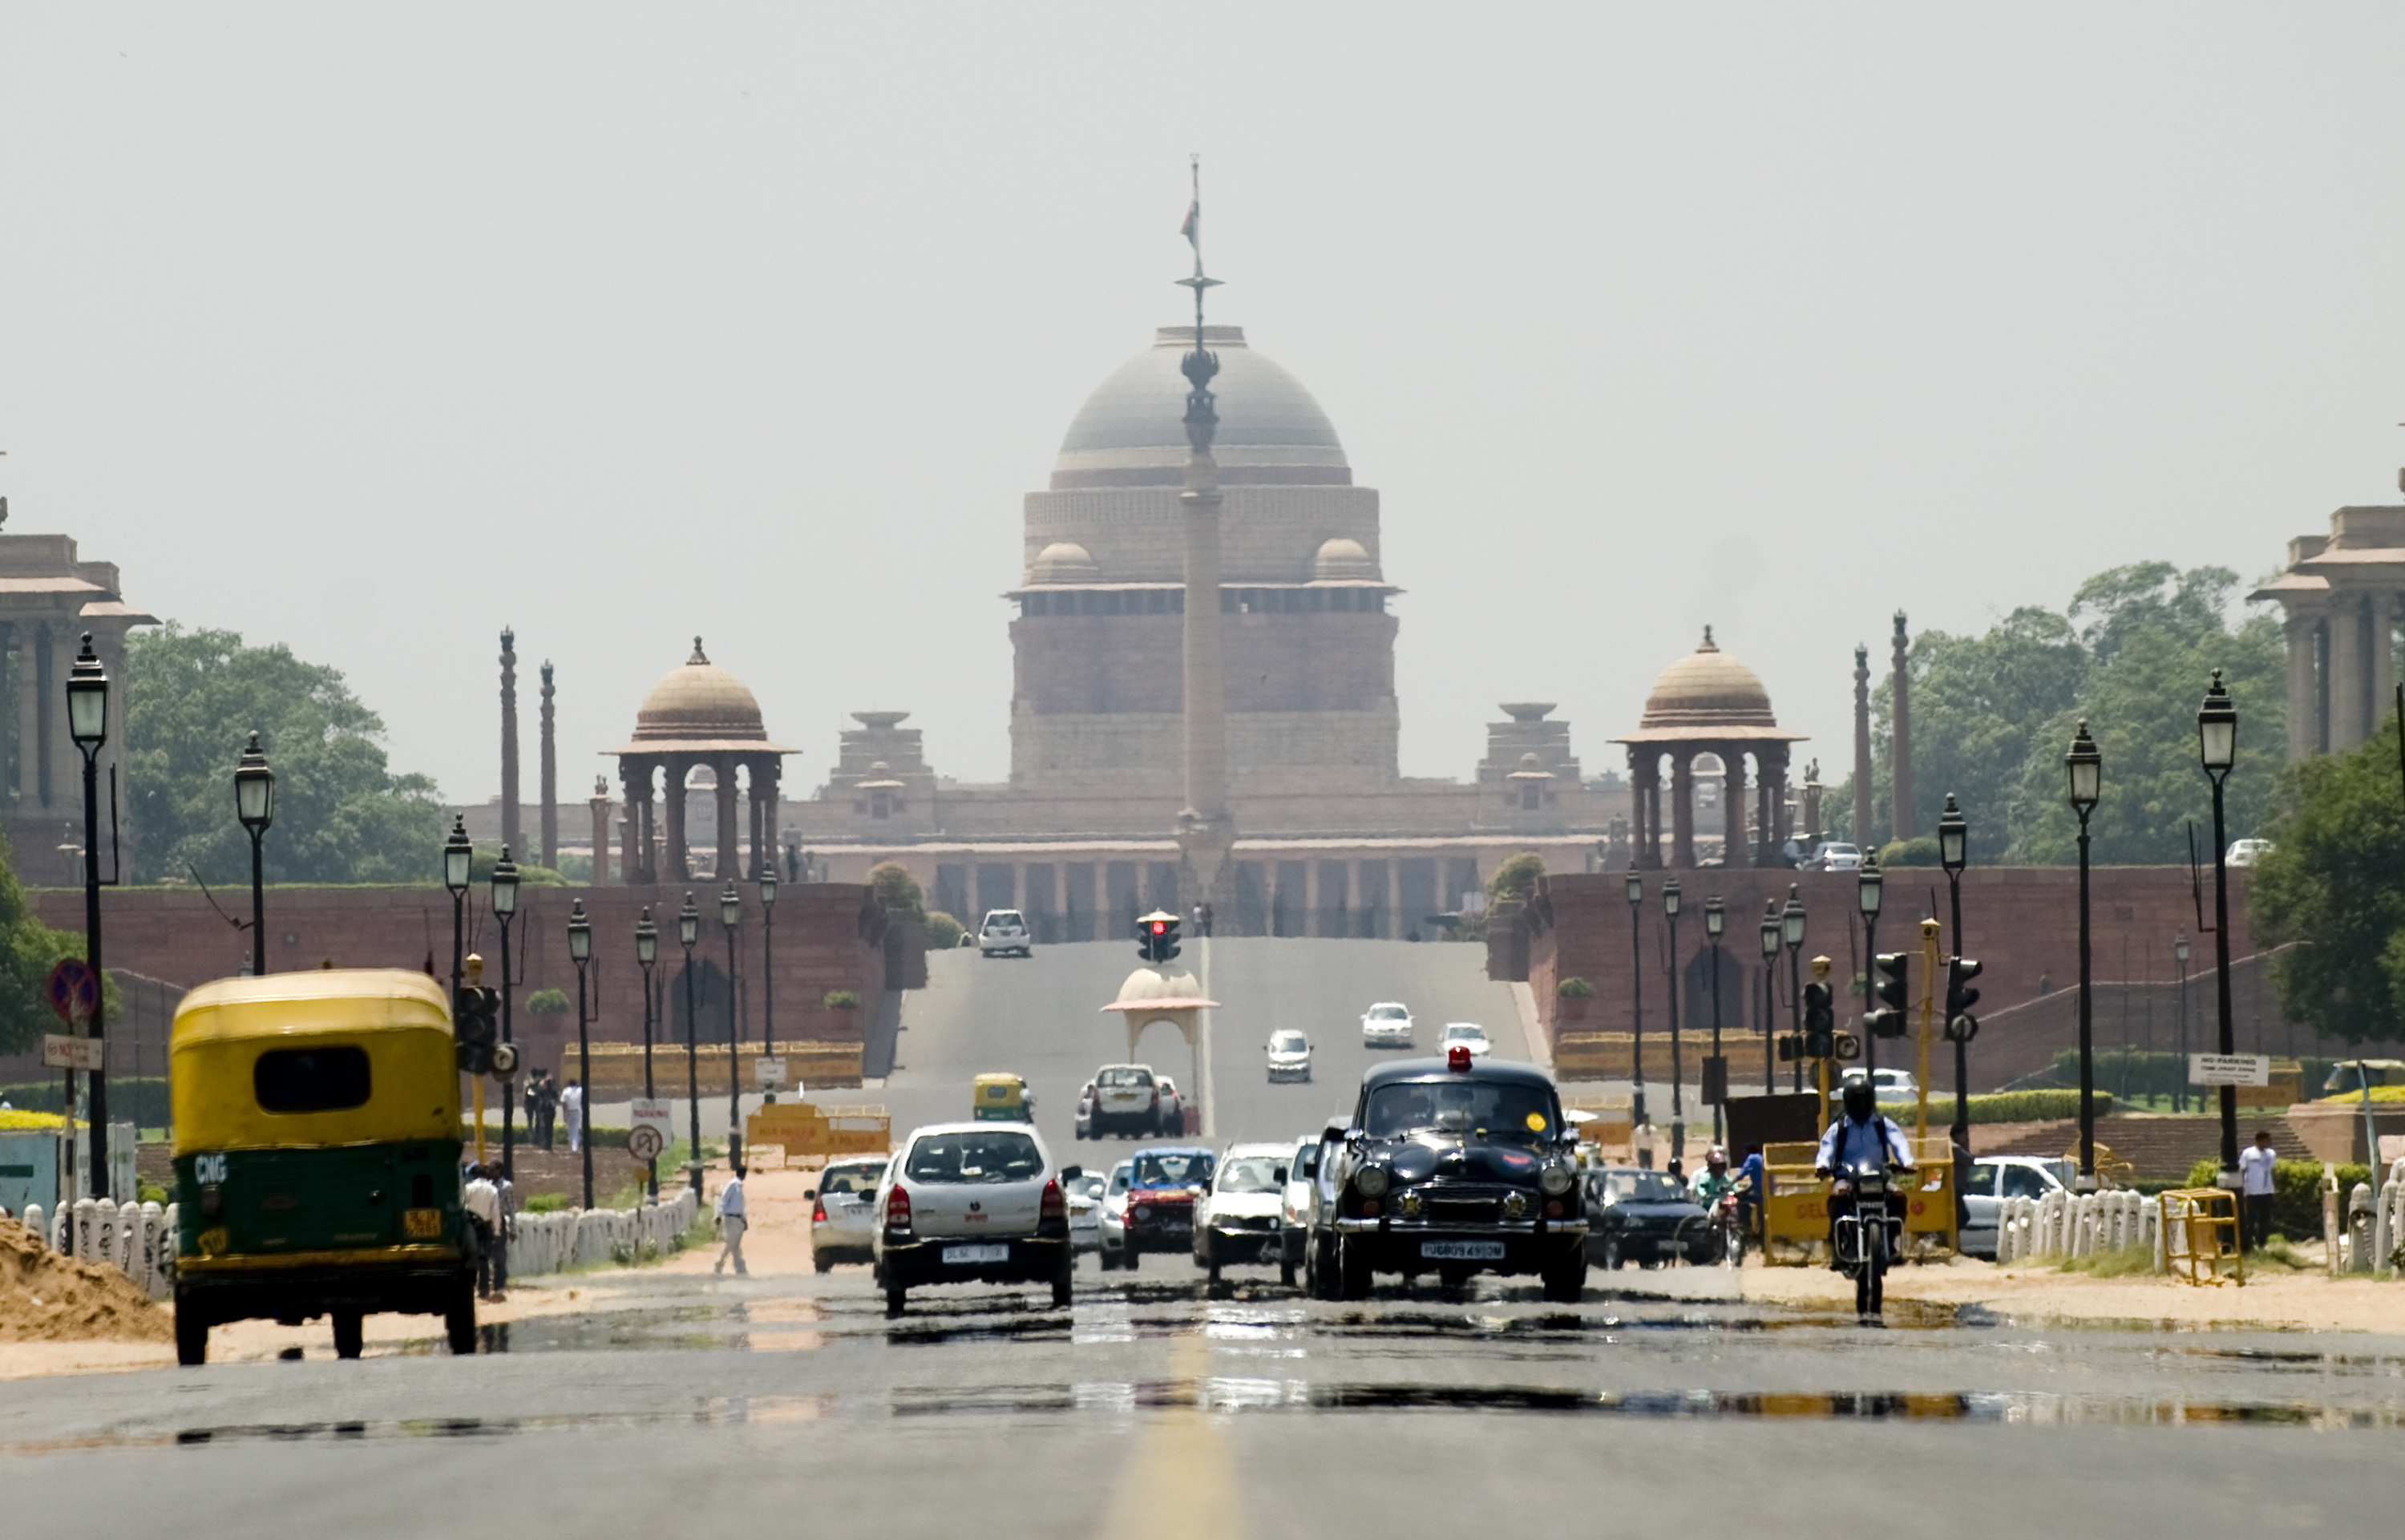 New Delhi, in the north of India, is projected to be among the hardest hit by rising temperatures.